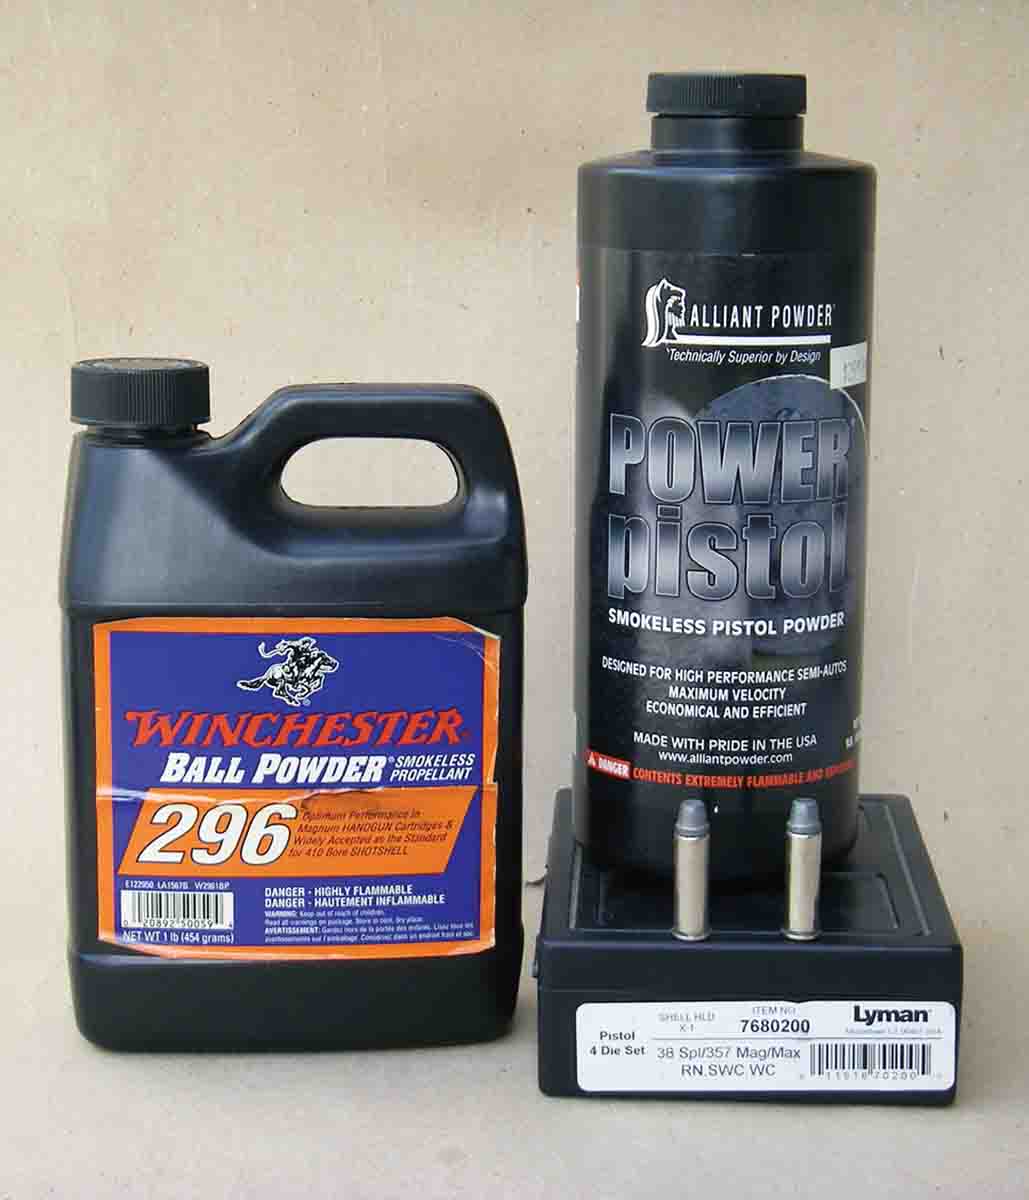 Winchester 296 Ball powder is not suitable for loading standard pressure or +P .38 Special ammunition and can even result in  dangerous loads. Powders with a similar burn rate as Alliant Power Pistol are much better choices.